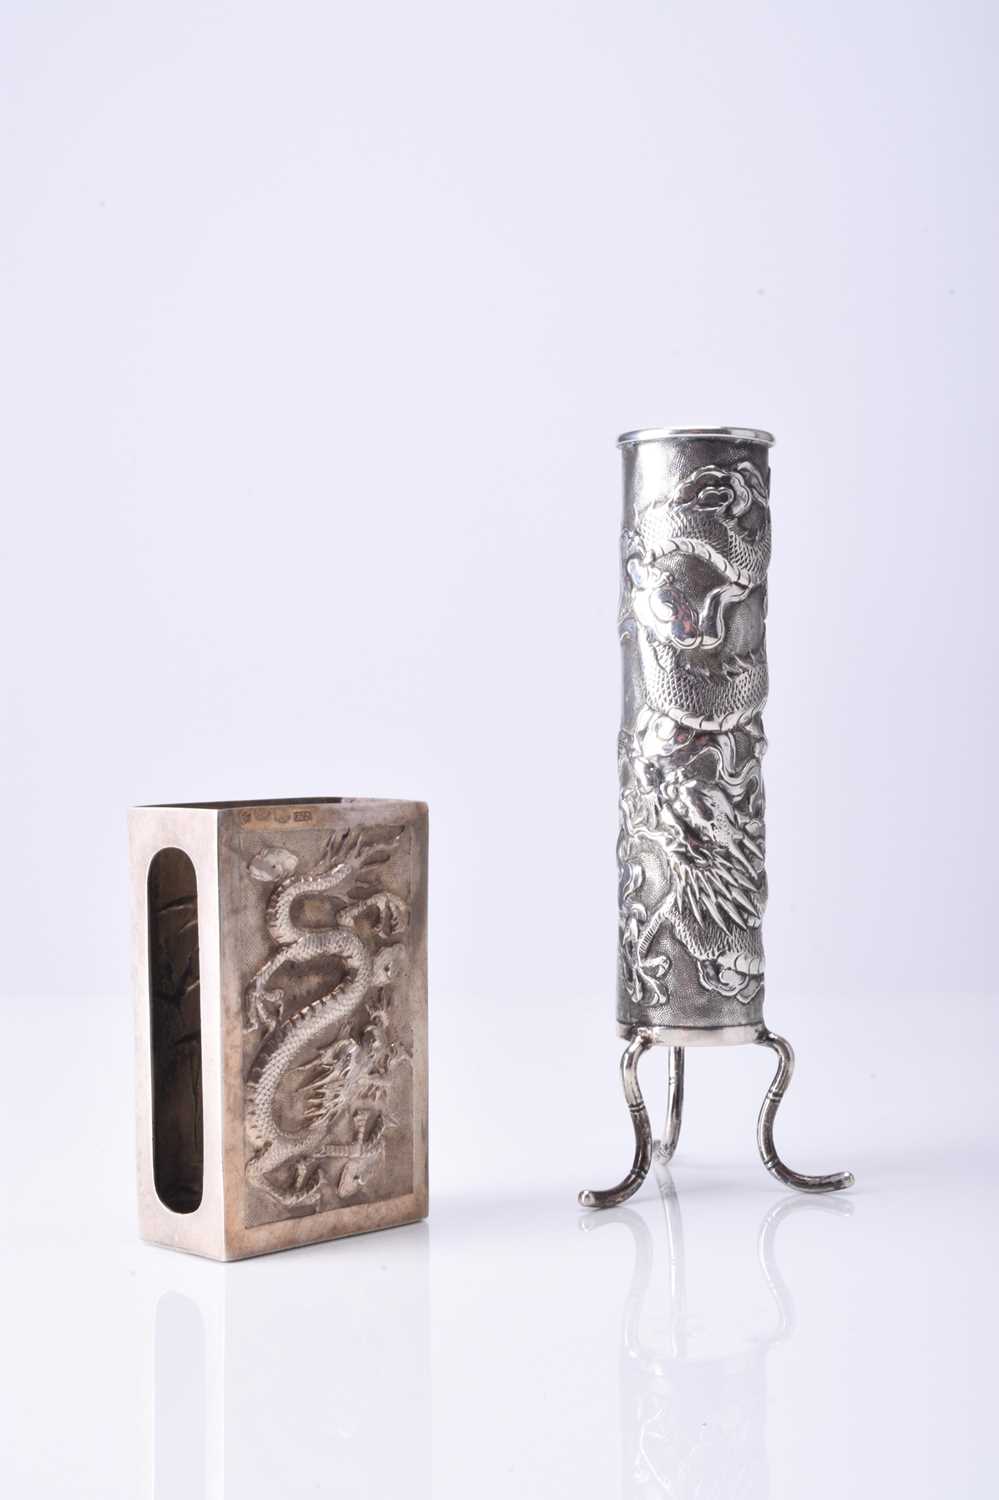 Wang Hing, a Chinese silver bud vase and matchbox holder